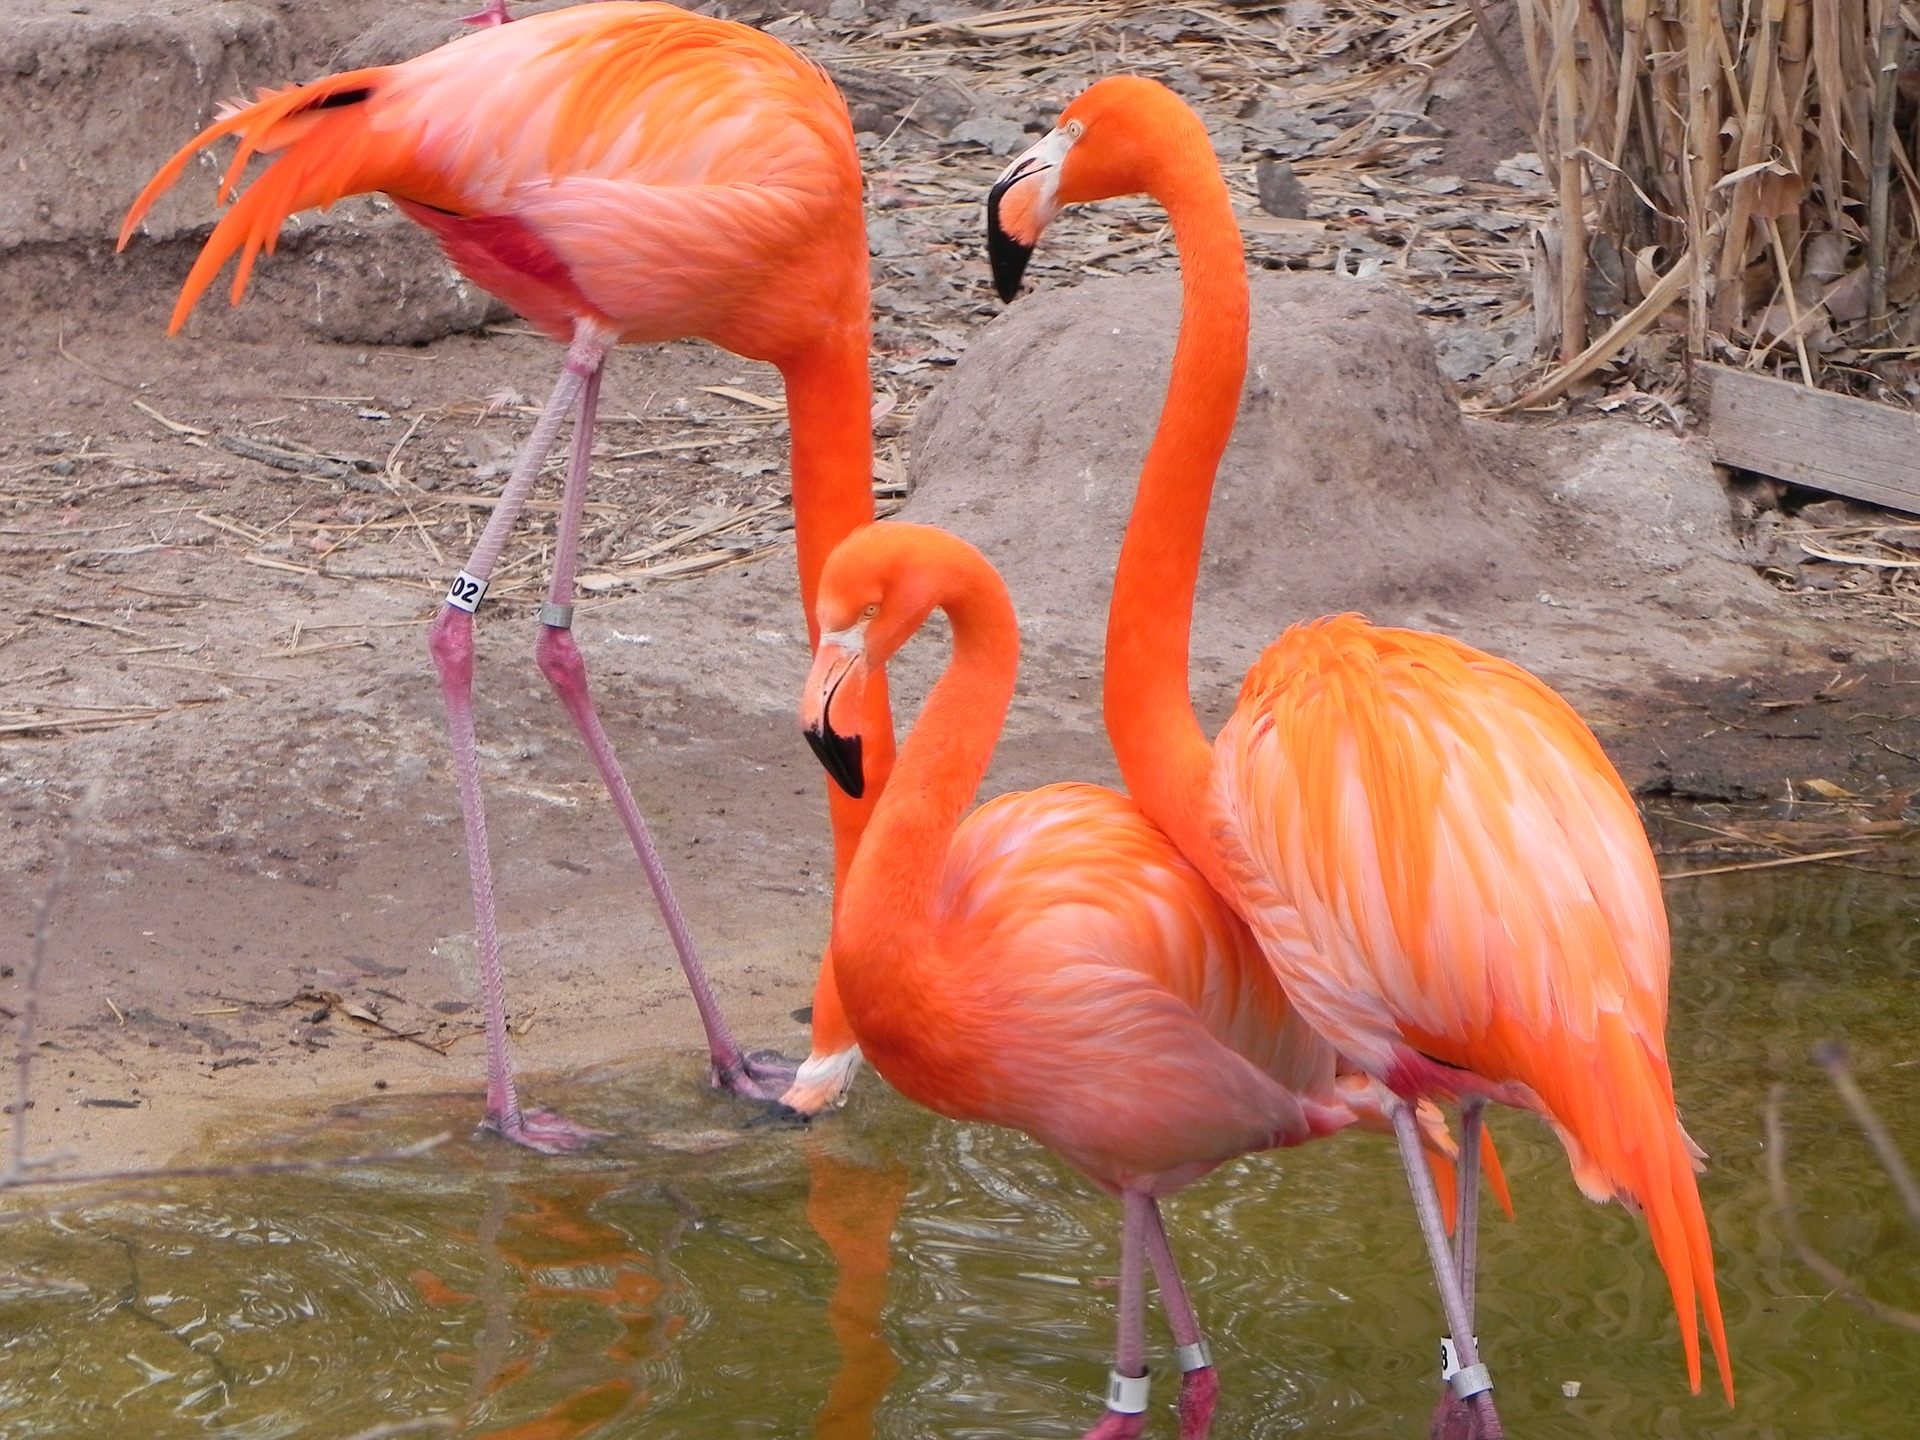 Pink Flamingos at the Albuquerque Zoo within the BioPark.